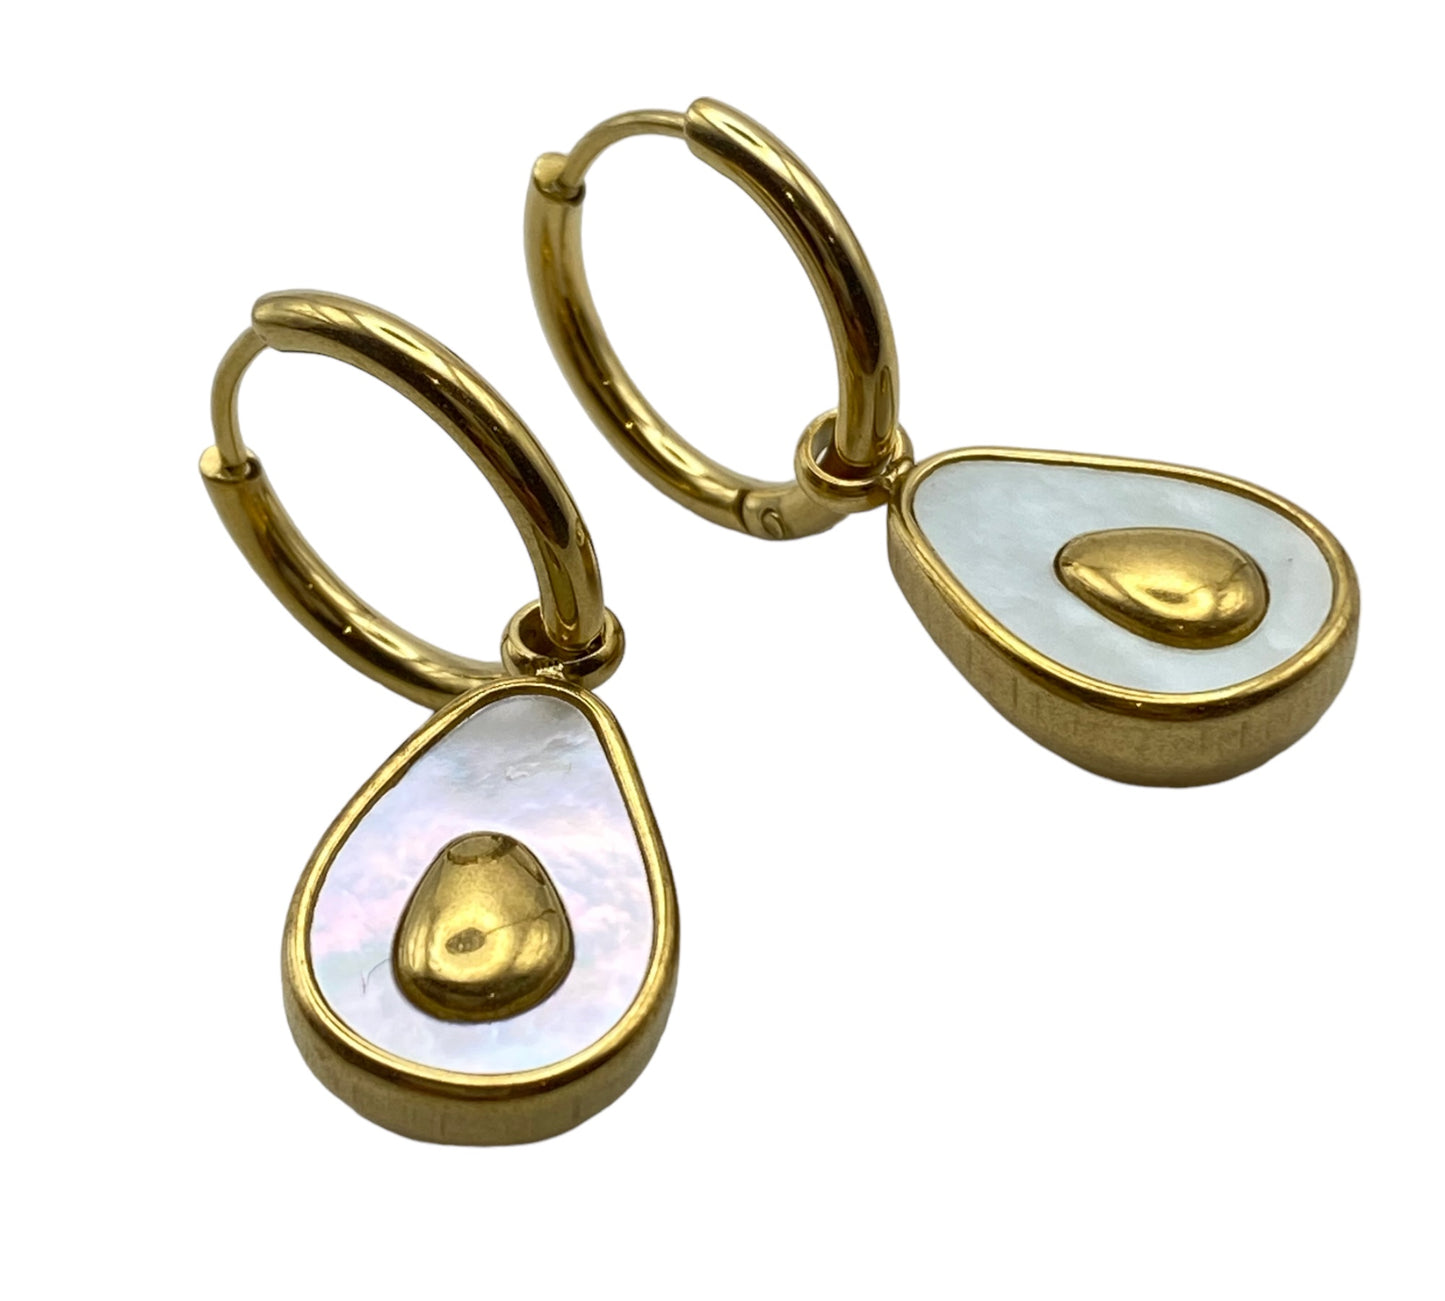 "DROPADO" gold plated hoop earrings with avocado inspired natural shell pendant